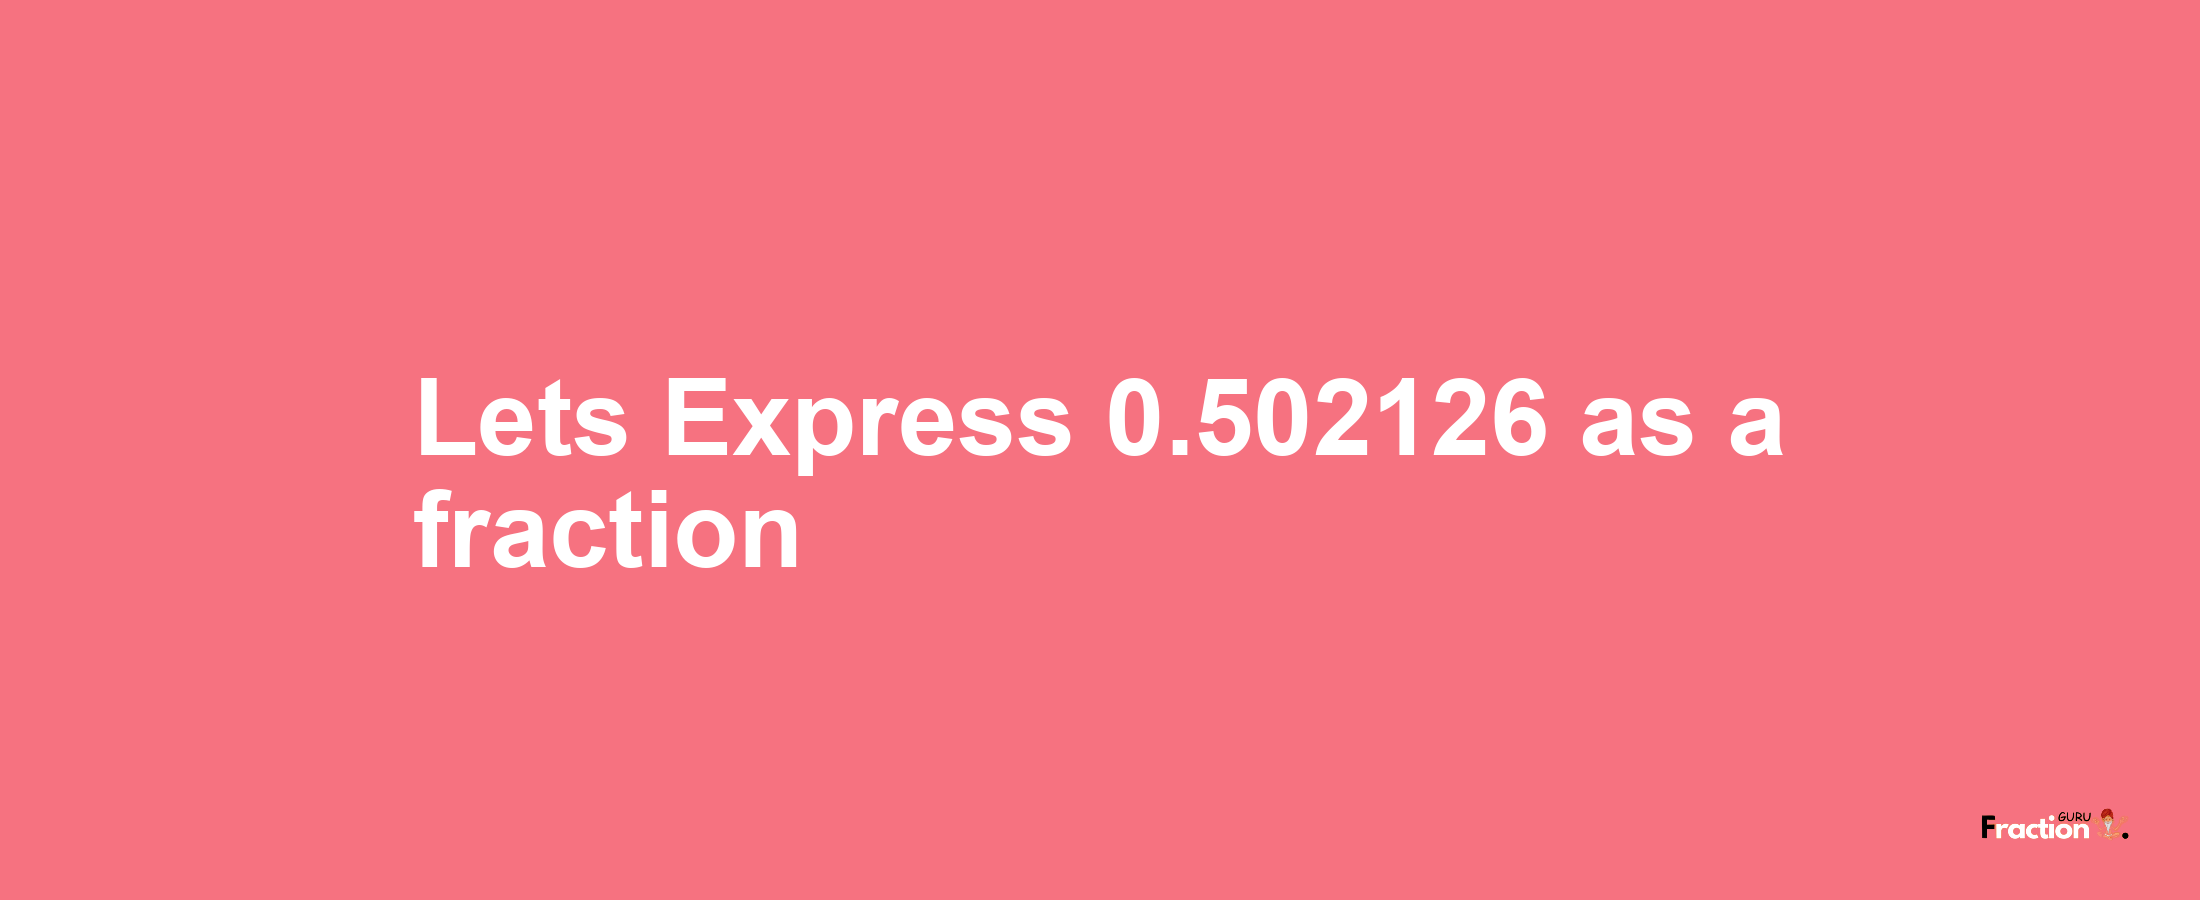 Lets Express 0.502126 as afraction